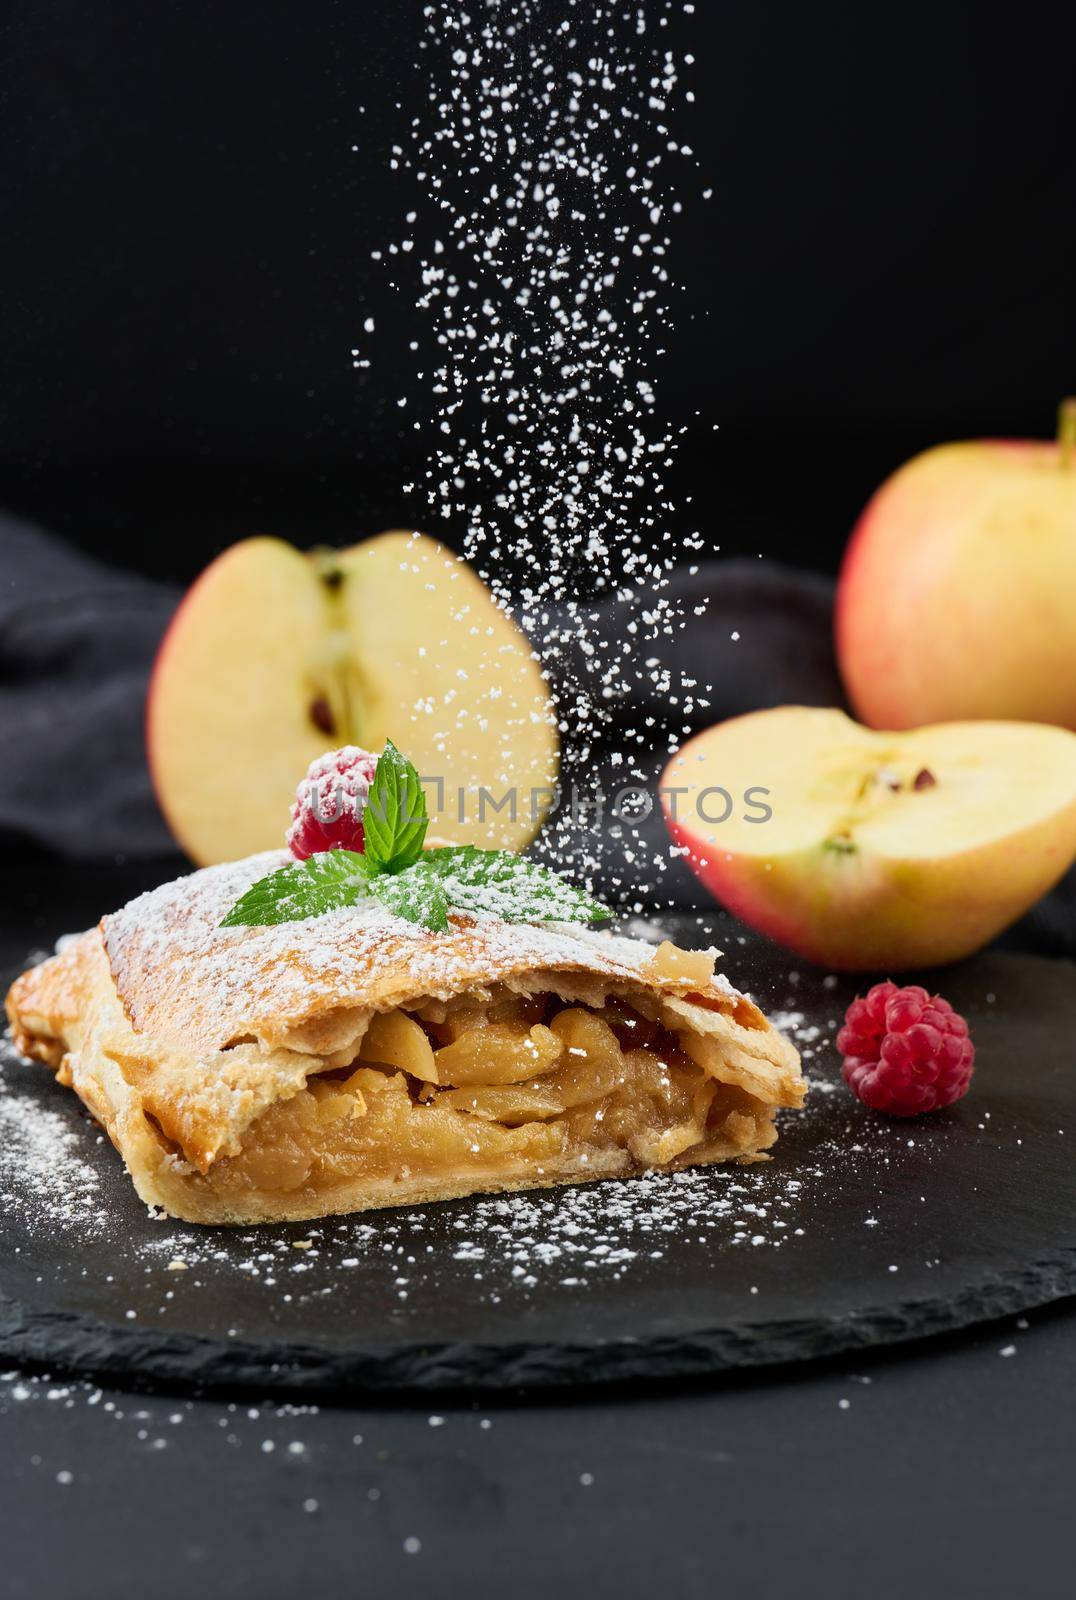 Baked strudel with apples sprinkled with powdered sugar on a black board, delicious dessert